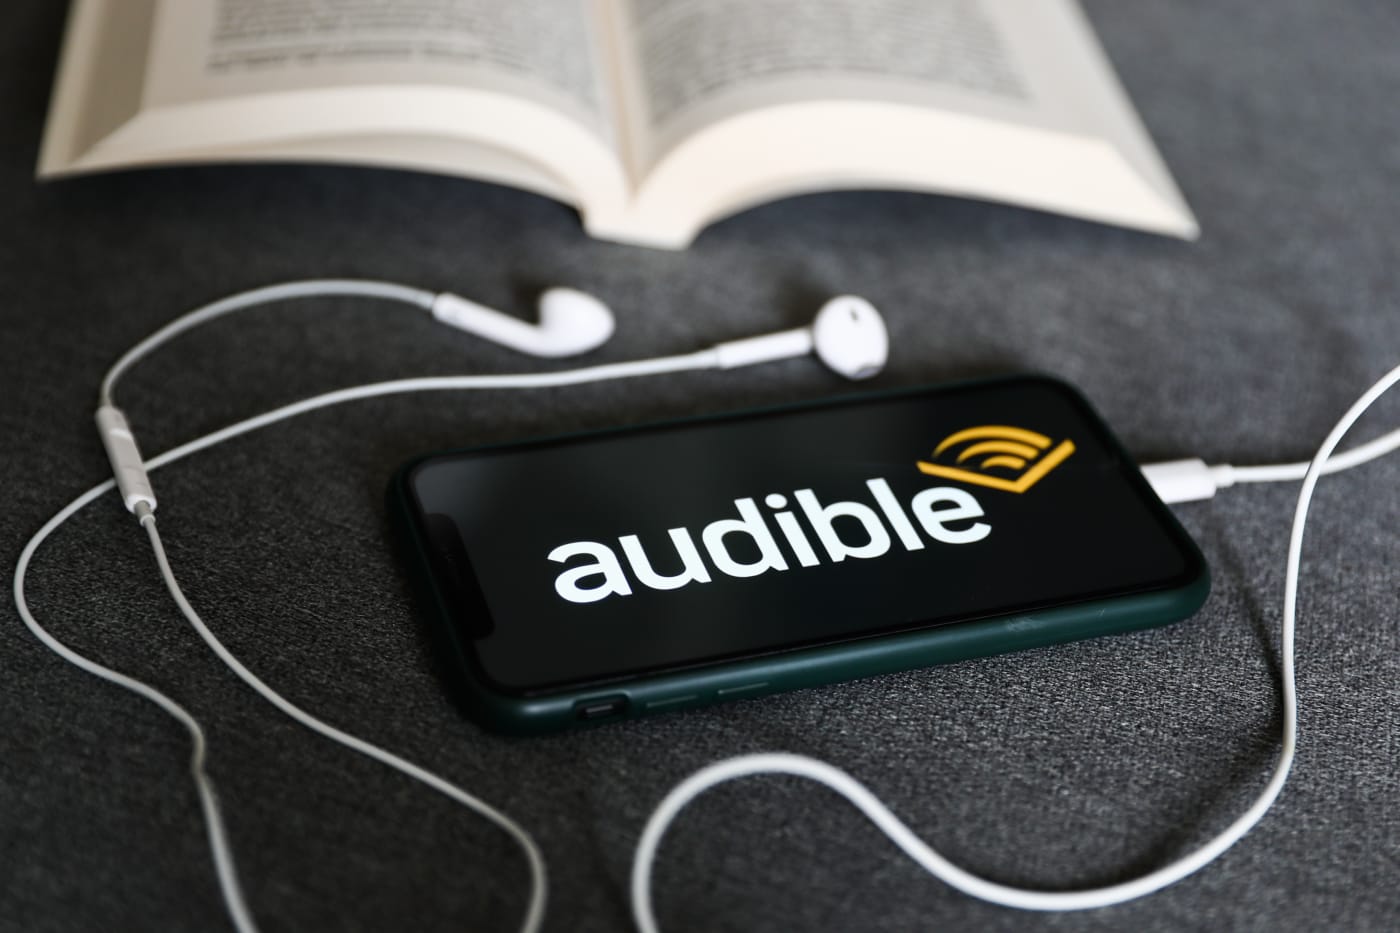 Audible is testing book recommendations based on your Prime Video habits